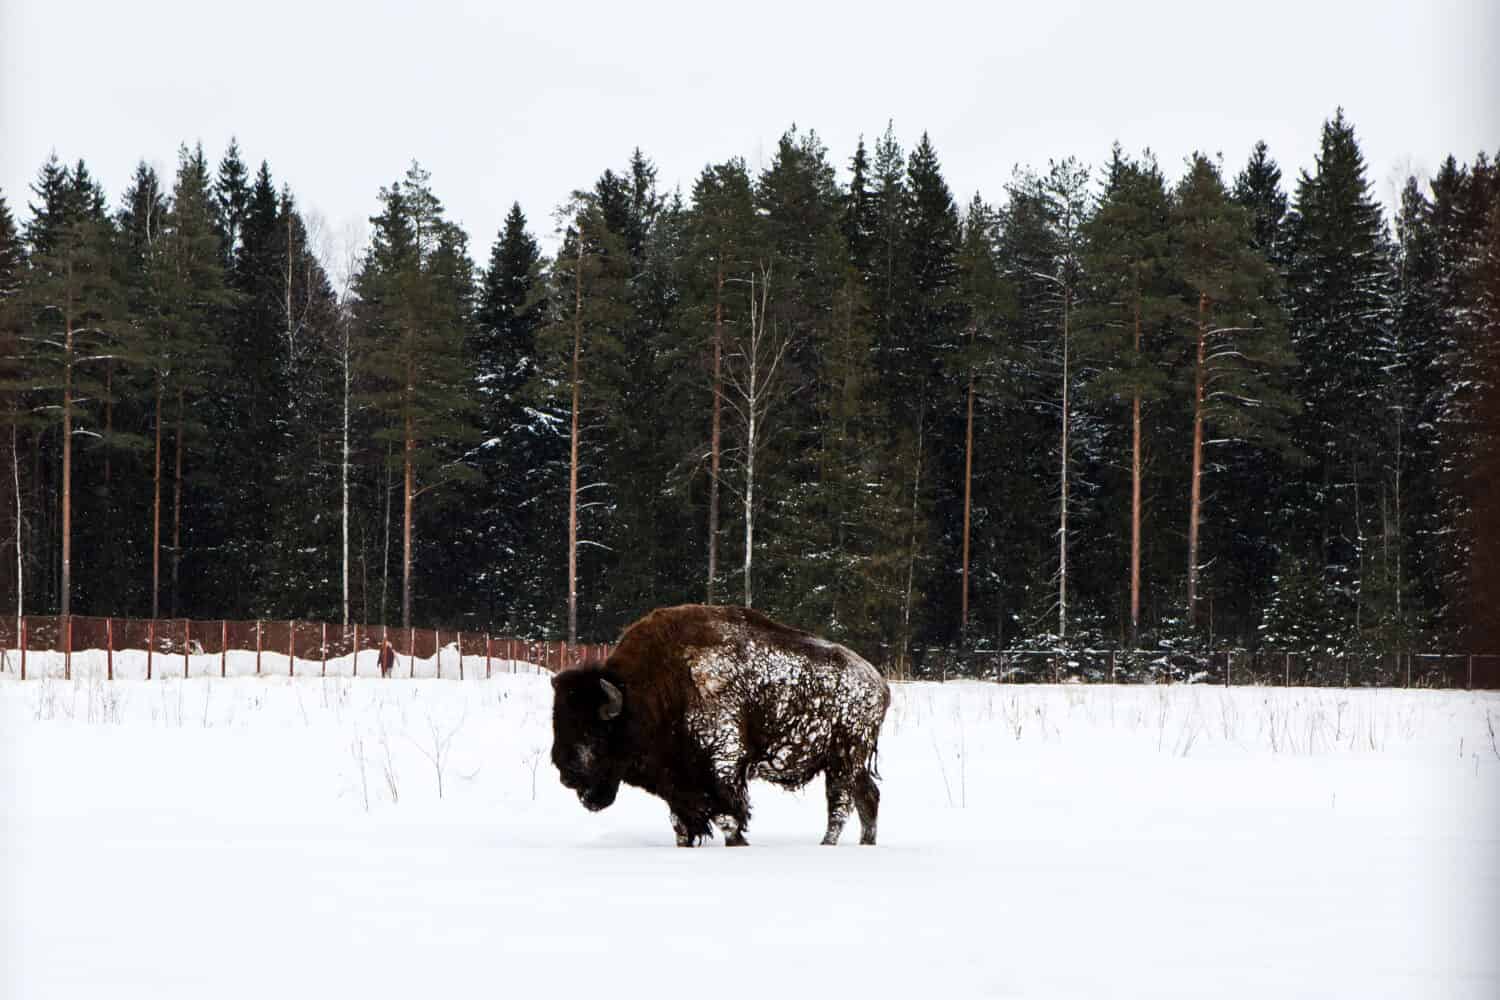 Panorama with bison in snowy winter outdoors. Rare cow Buffalo in the natural environment of the North. Endangered species protected by the people.